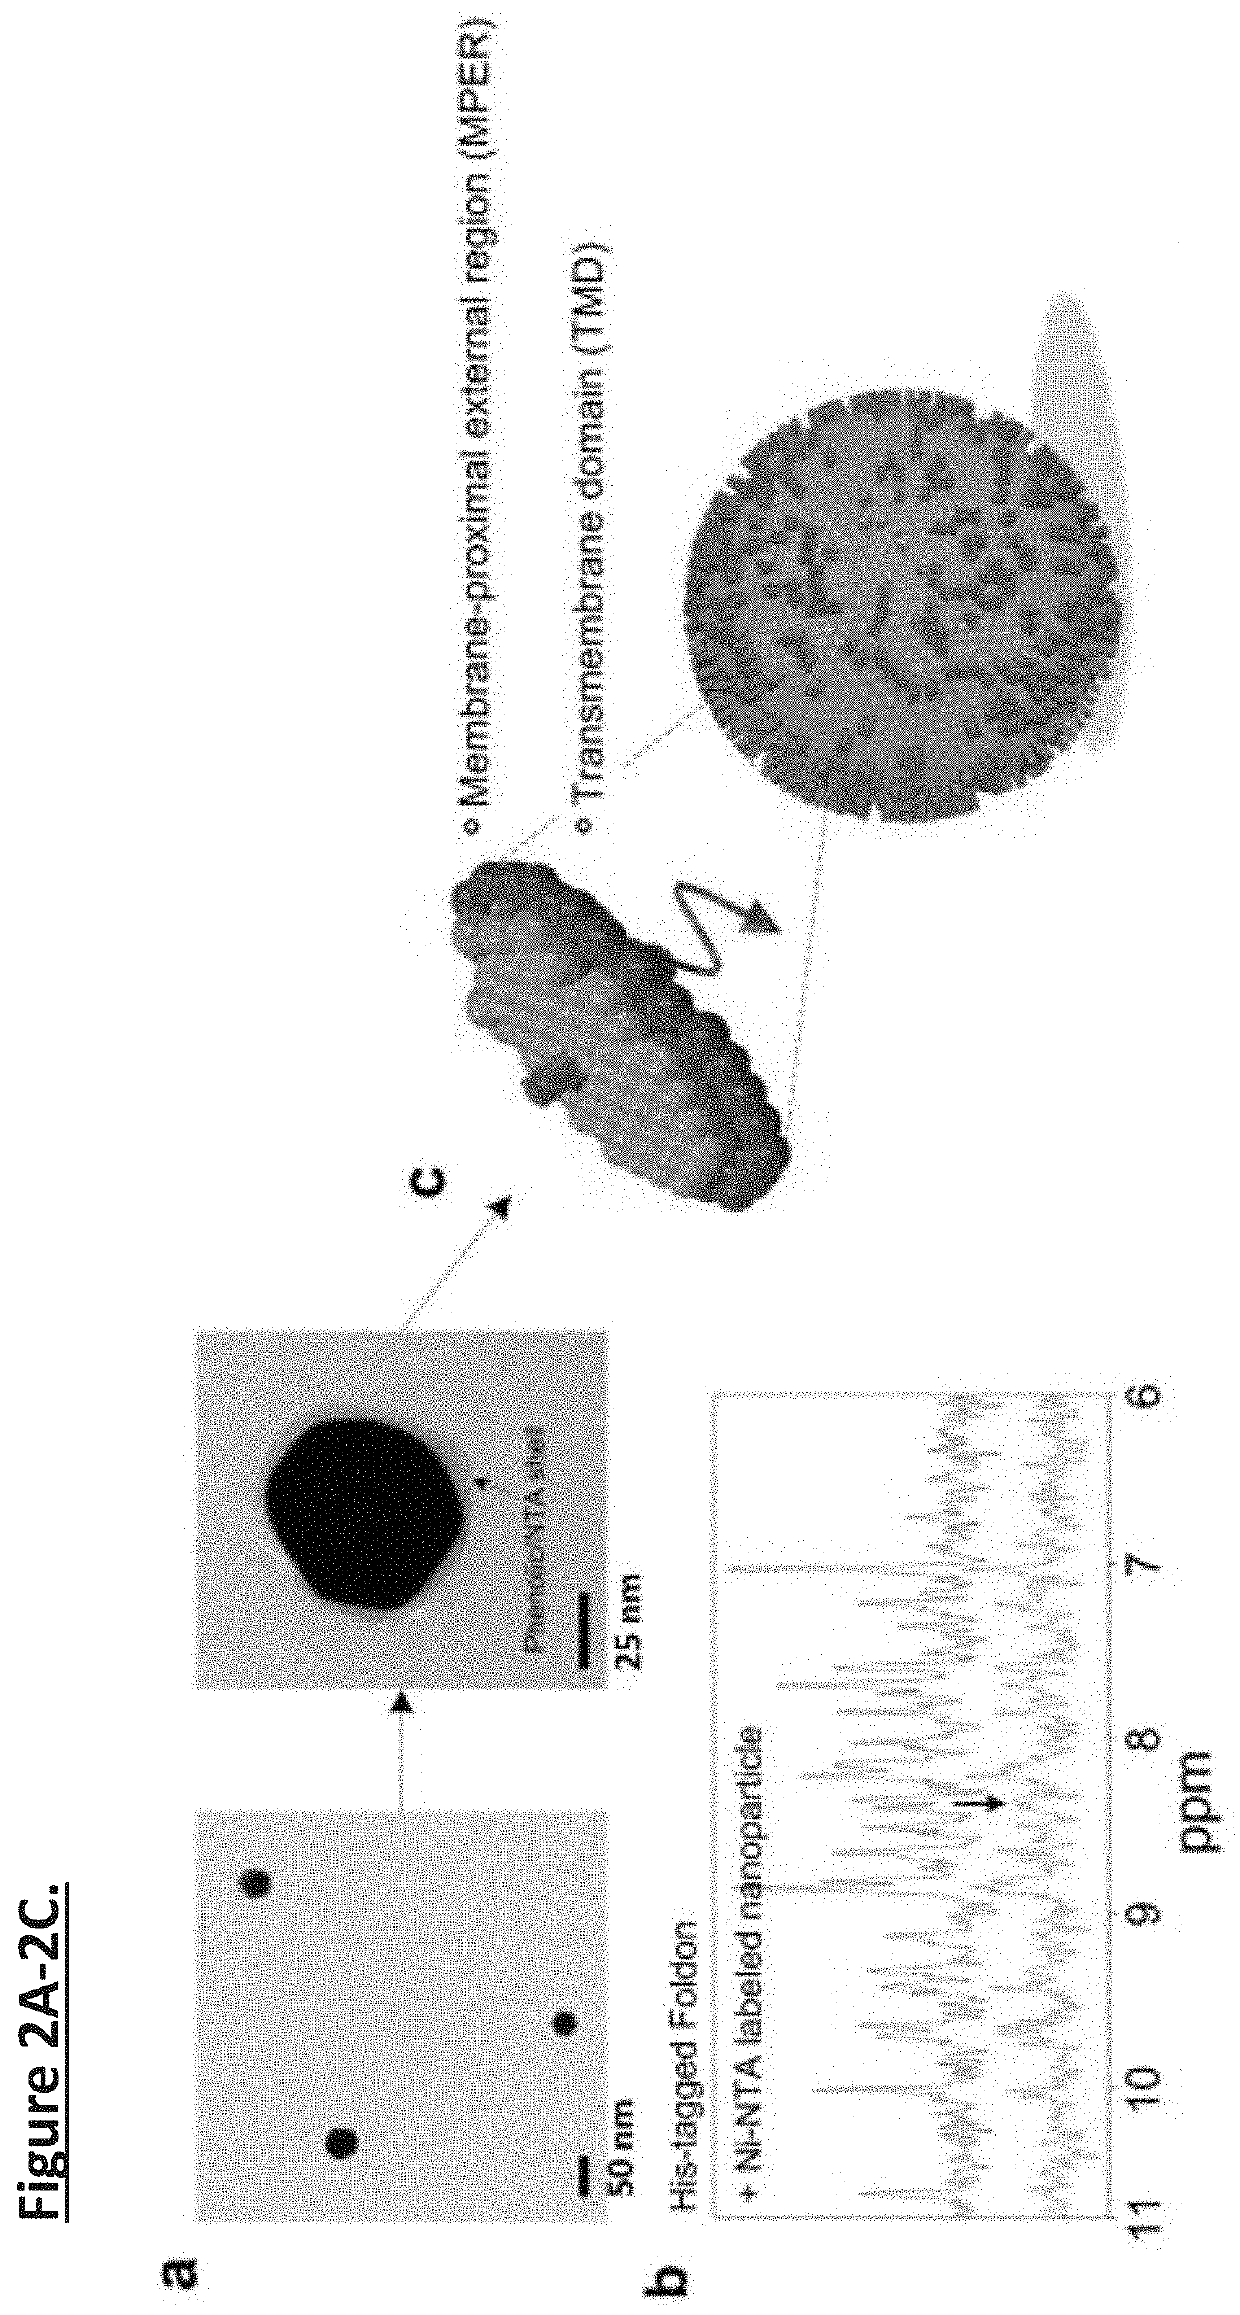 Unidirectional presentation of membrane proteins in nanoparticle-supported liposomes